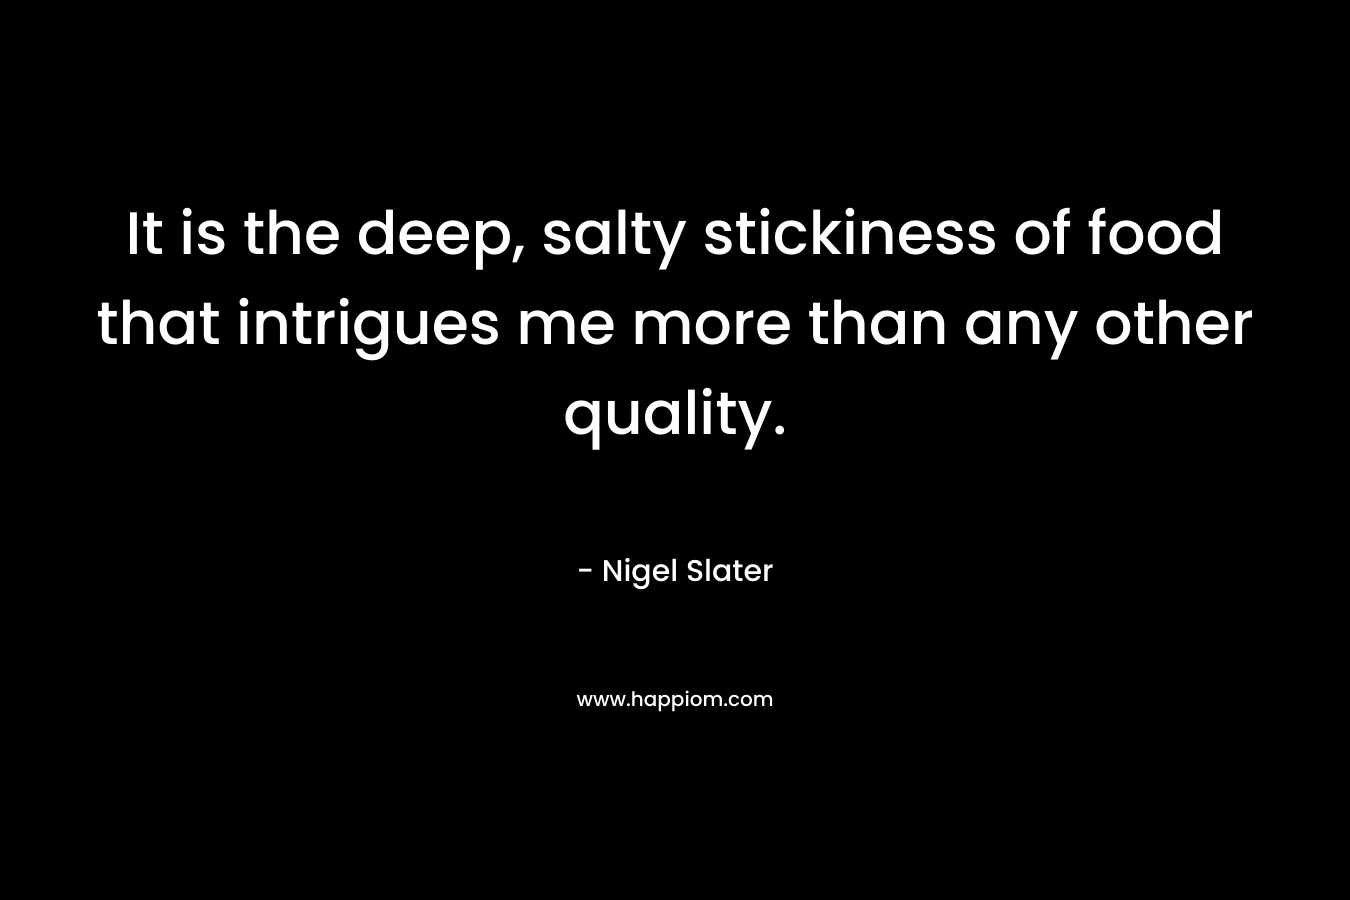 It is the deep, salty stickiness of food that intrigues me more than any other quality. – Nigel Slater